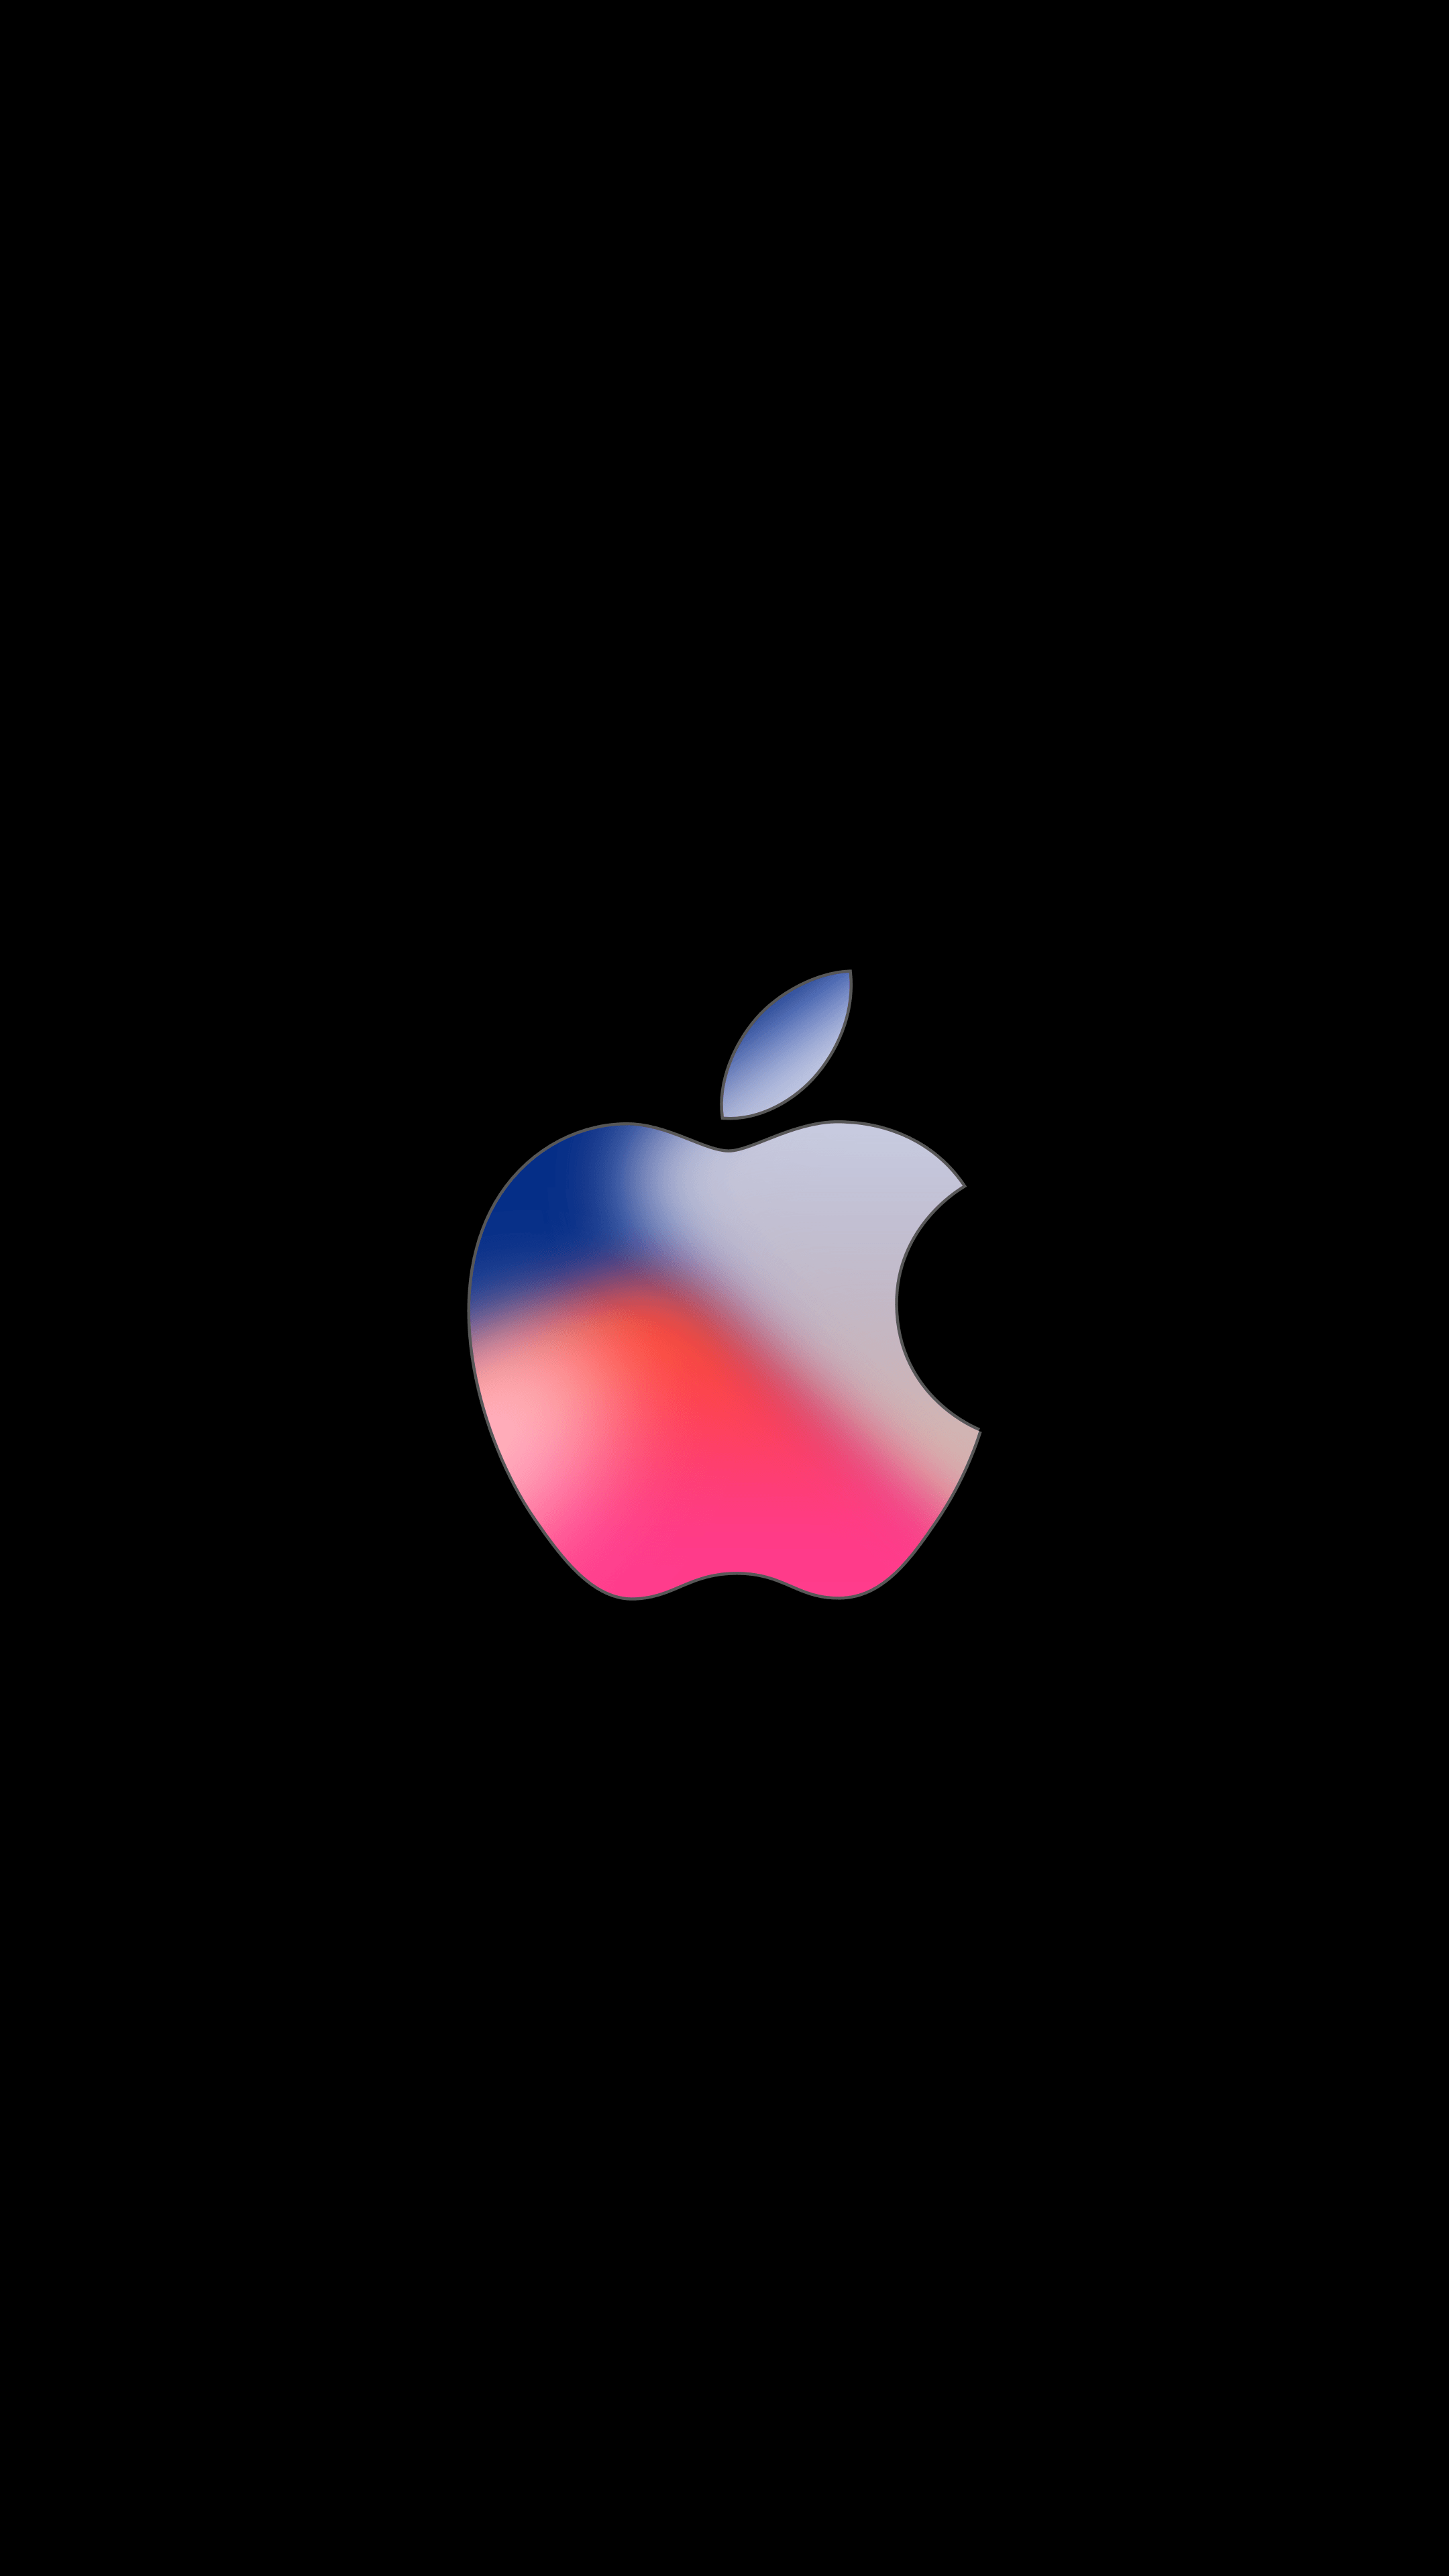 Iphone XR Wallpapers 4K 